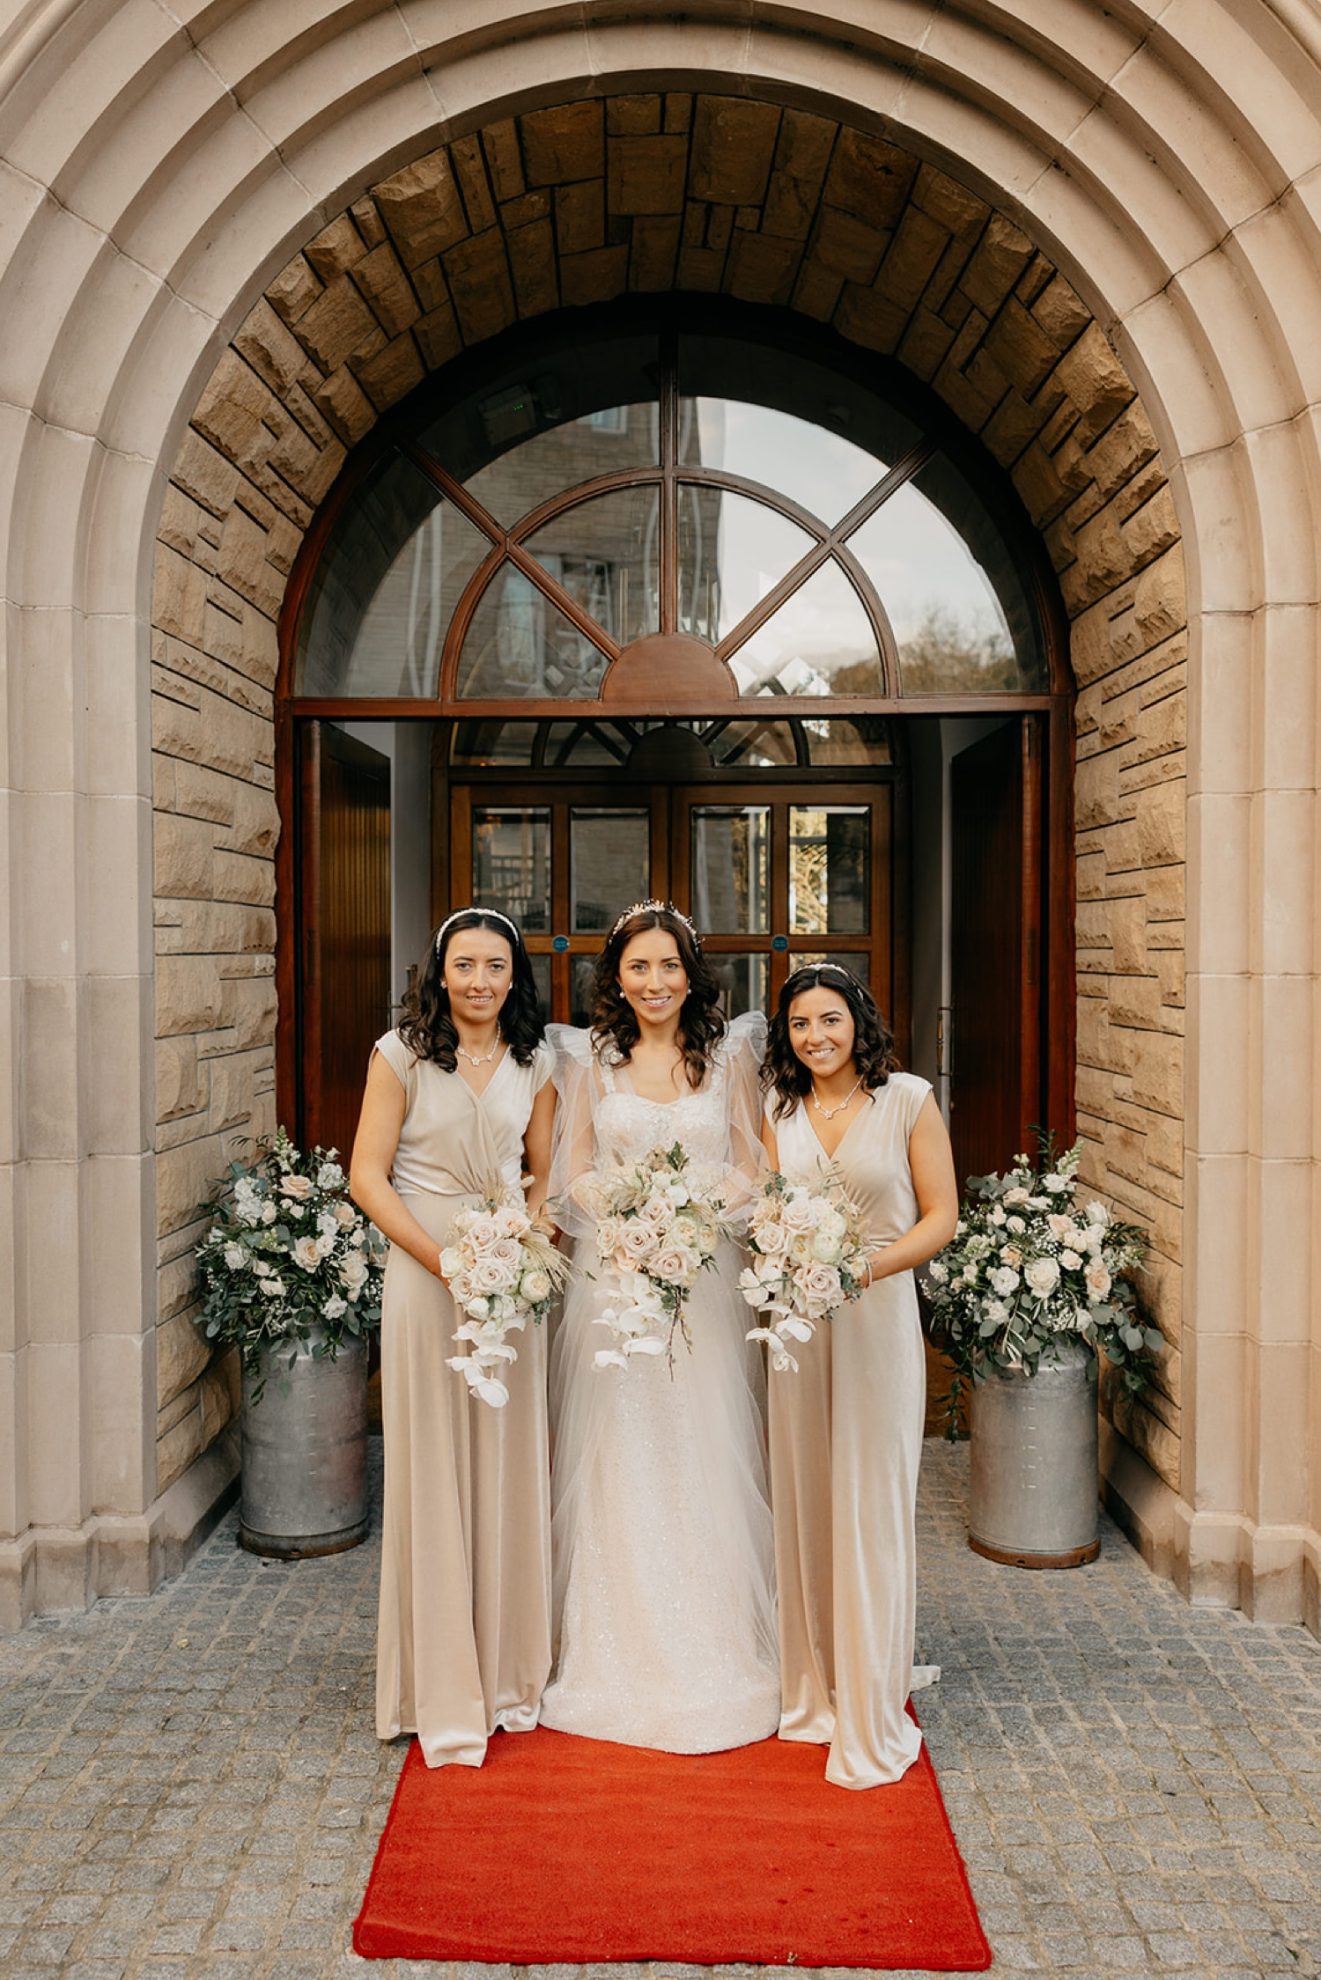 Bride Joanne with her bridesmaids